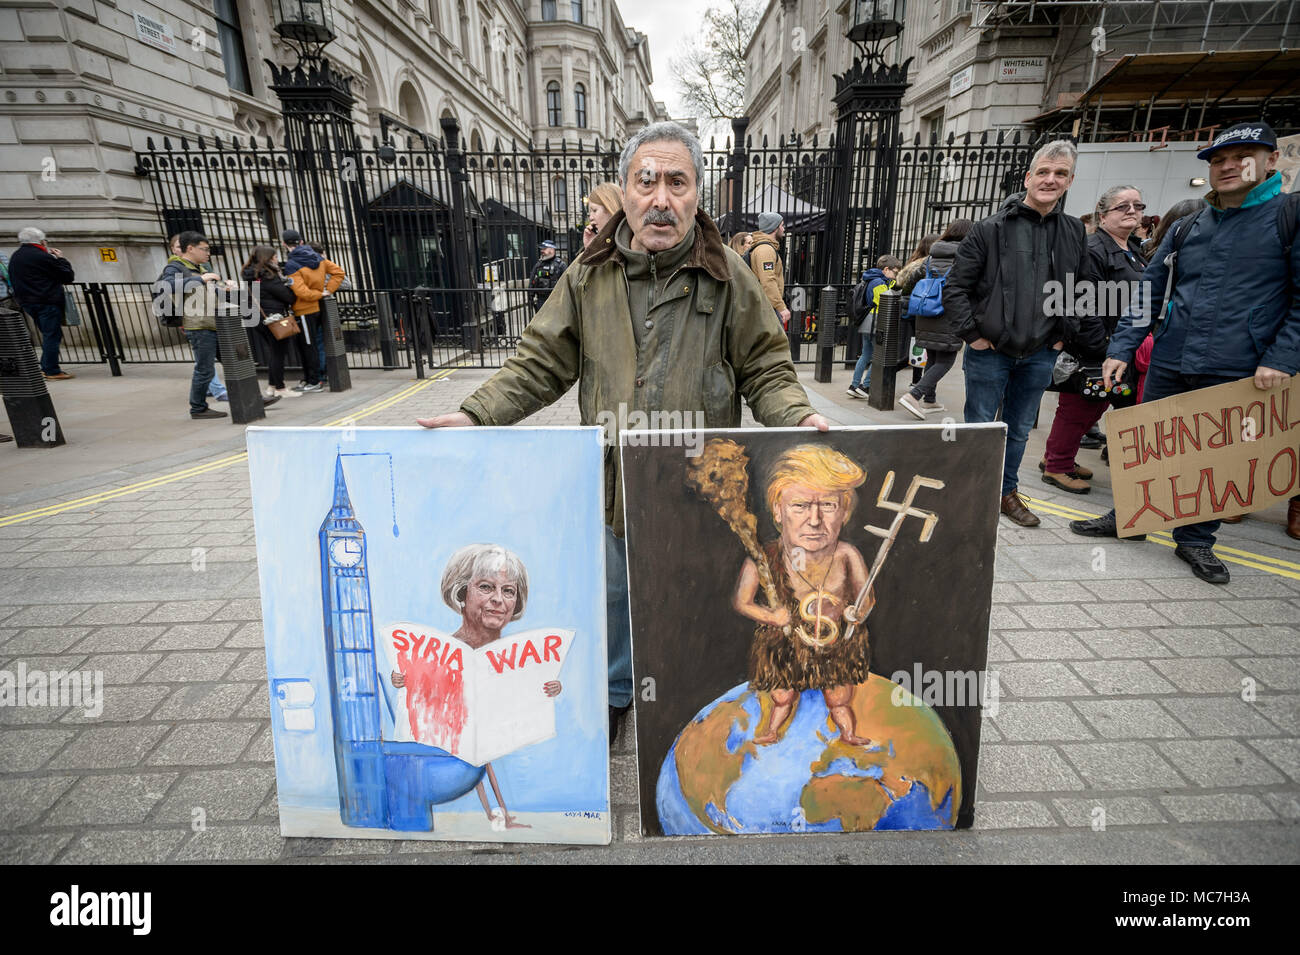 London, UK. 13th April 2018. Demonstration by anti-war protesters organised by Stop the War Coalition staged opposite Downing Street against proposed air strikes on Syria. Credit: Guy Corbishley/Alamy Live News Stock Photo